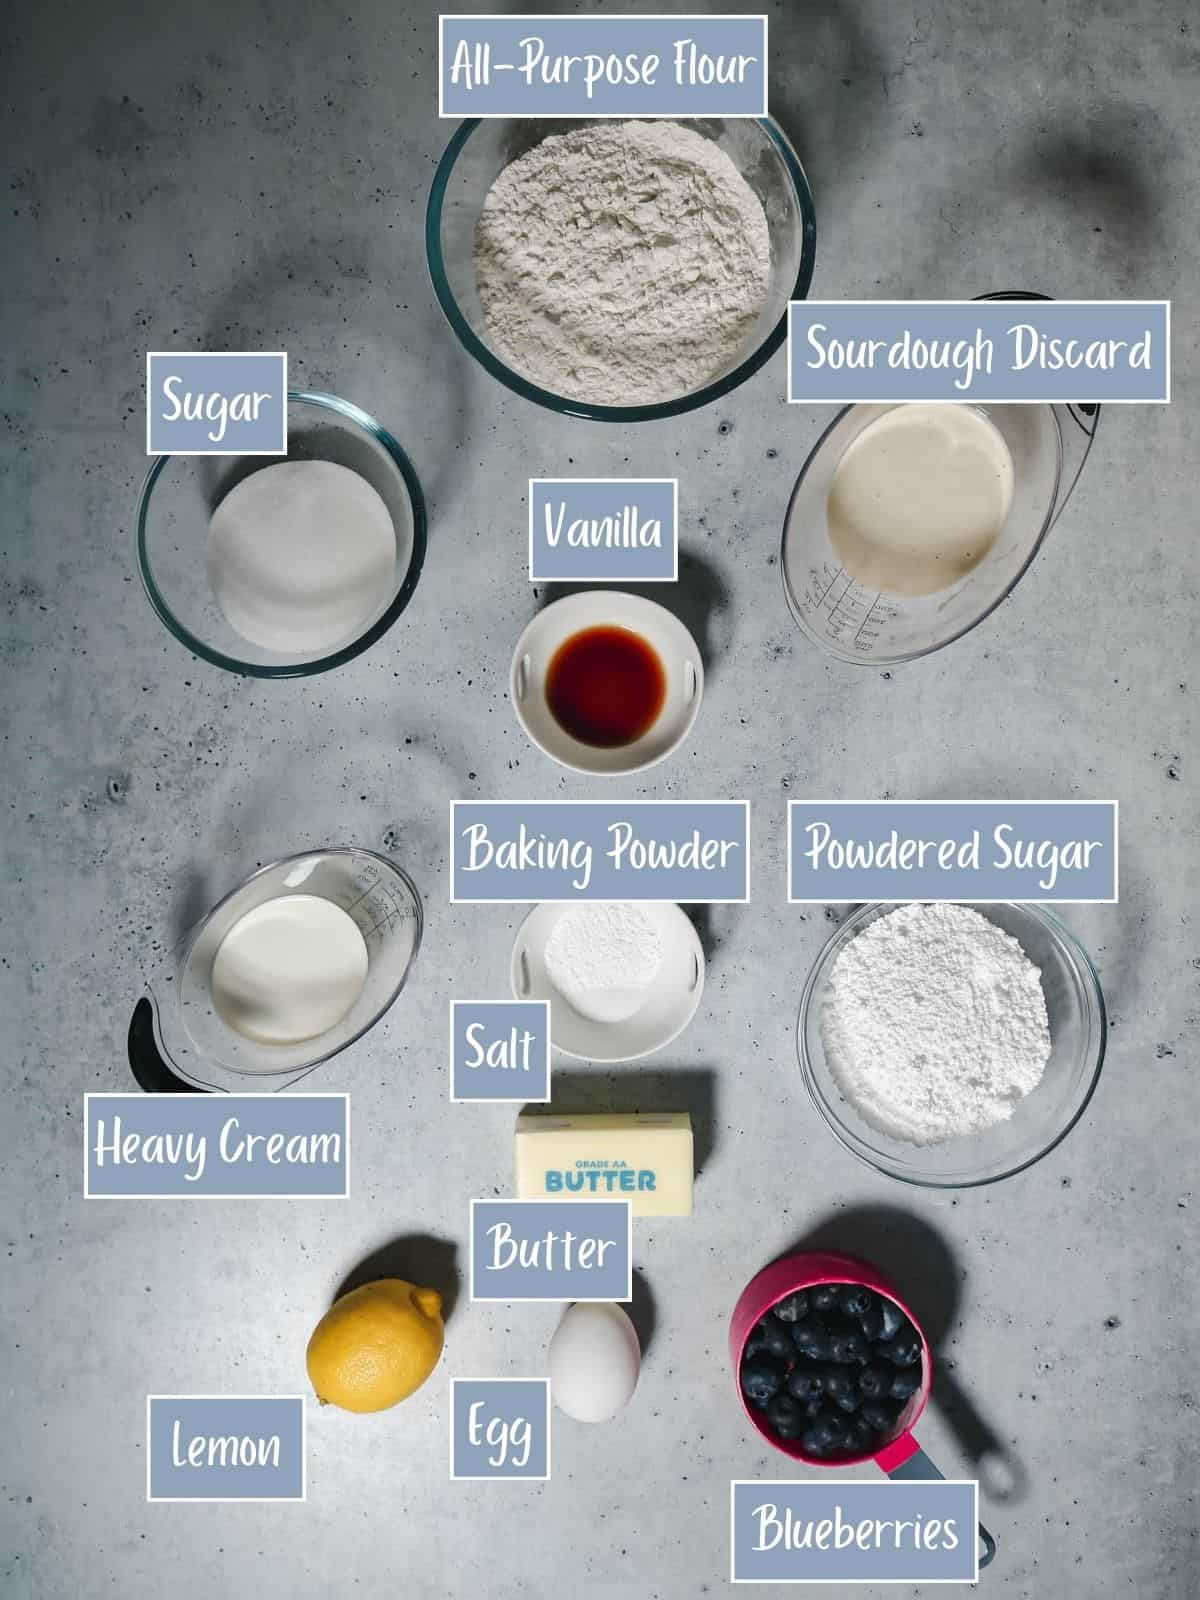 Labeled ingredients for making sourdough blueberry scones.